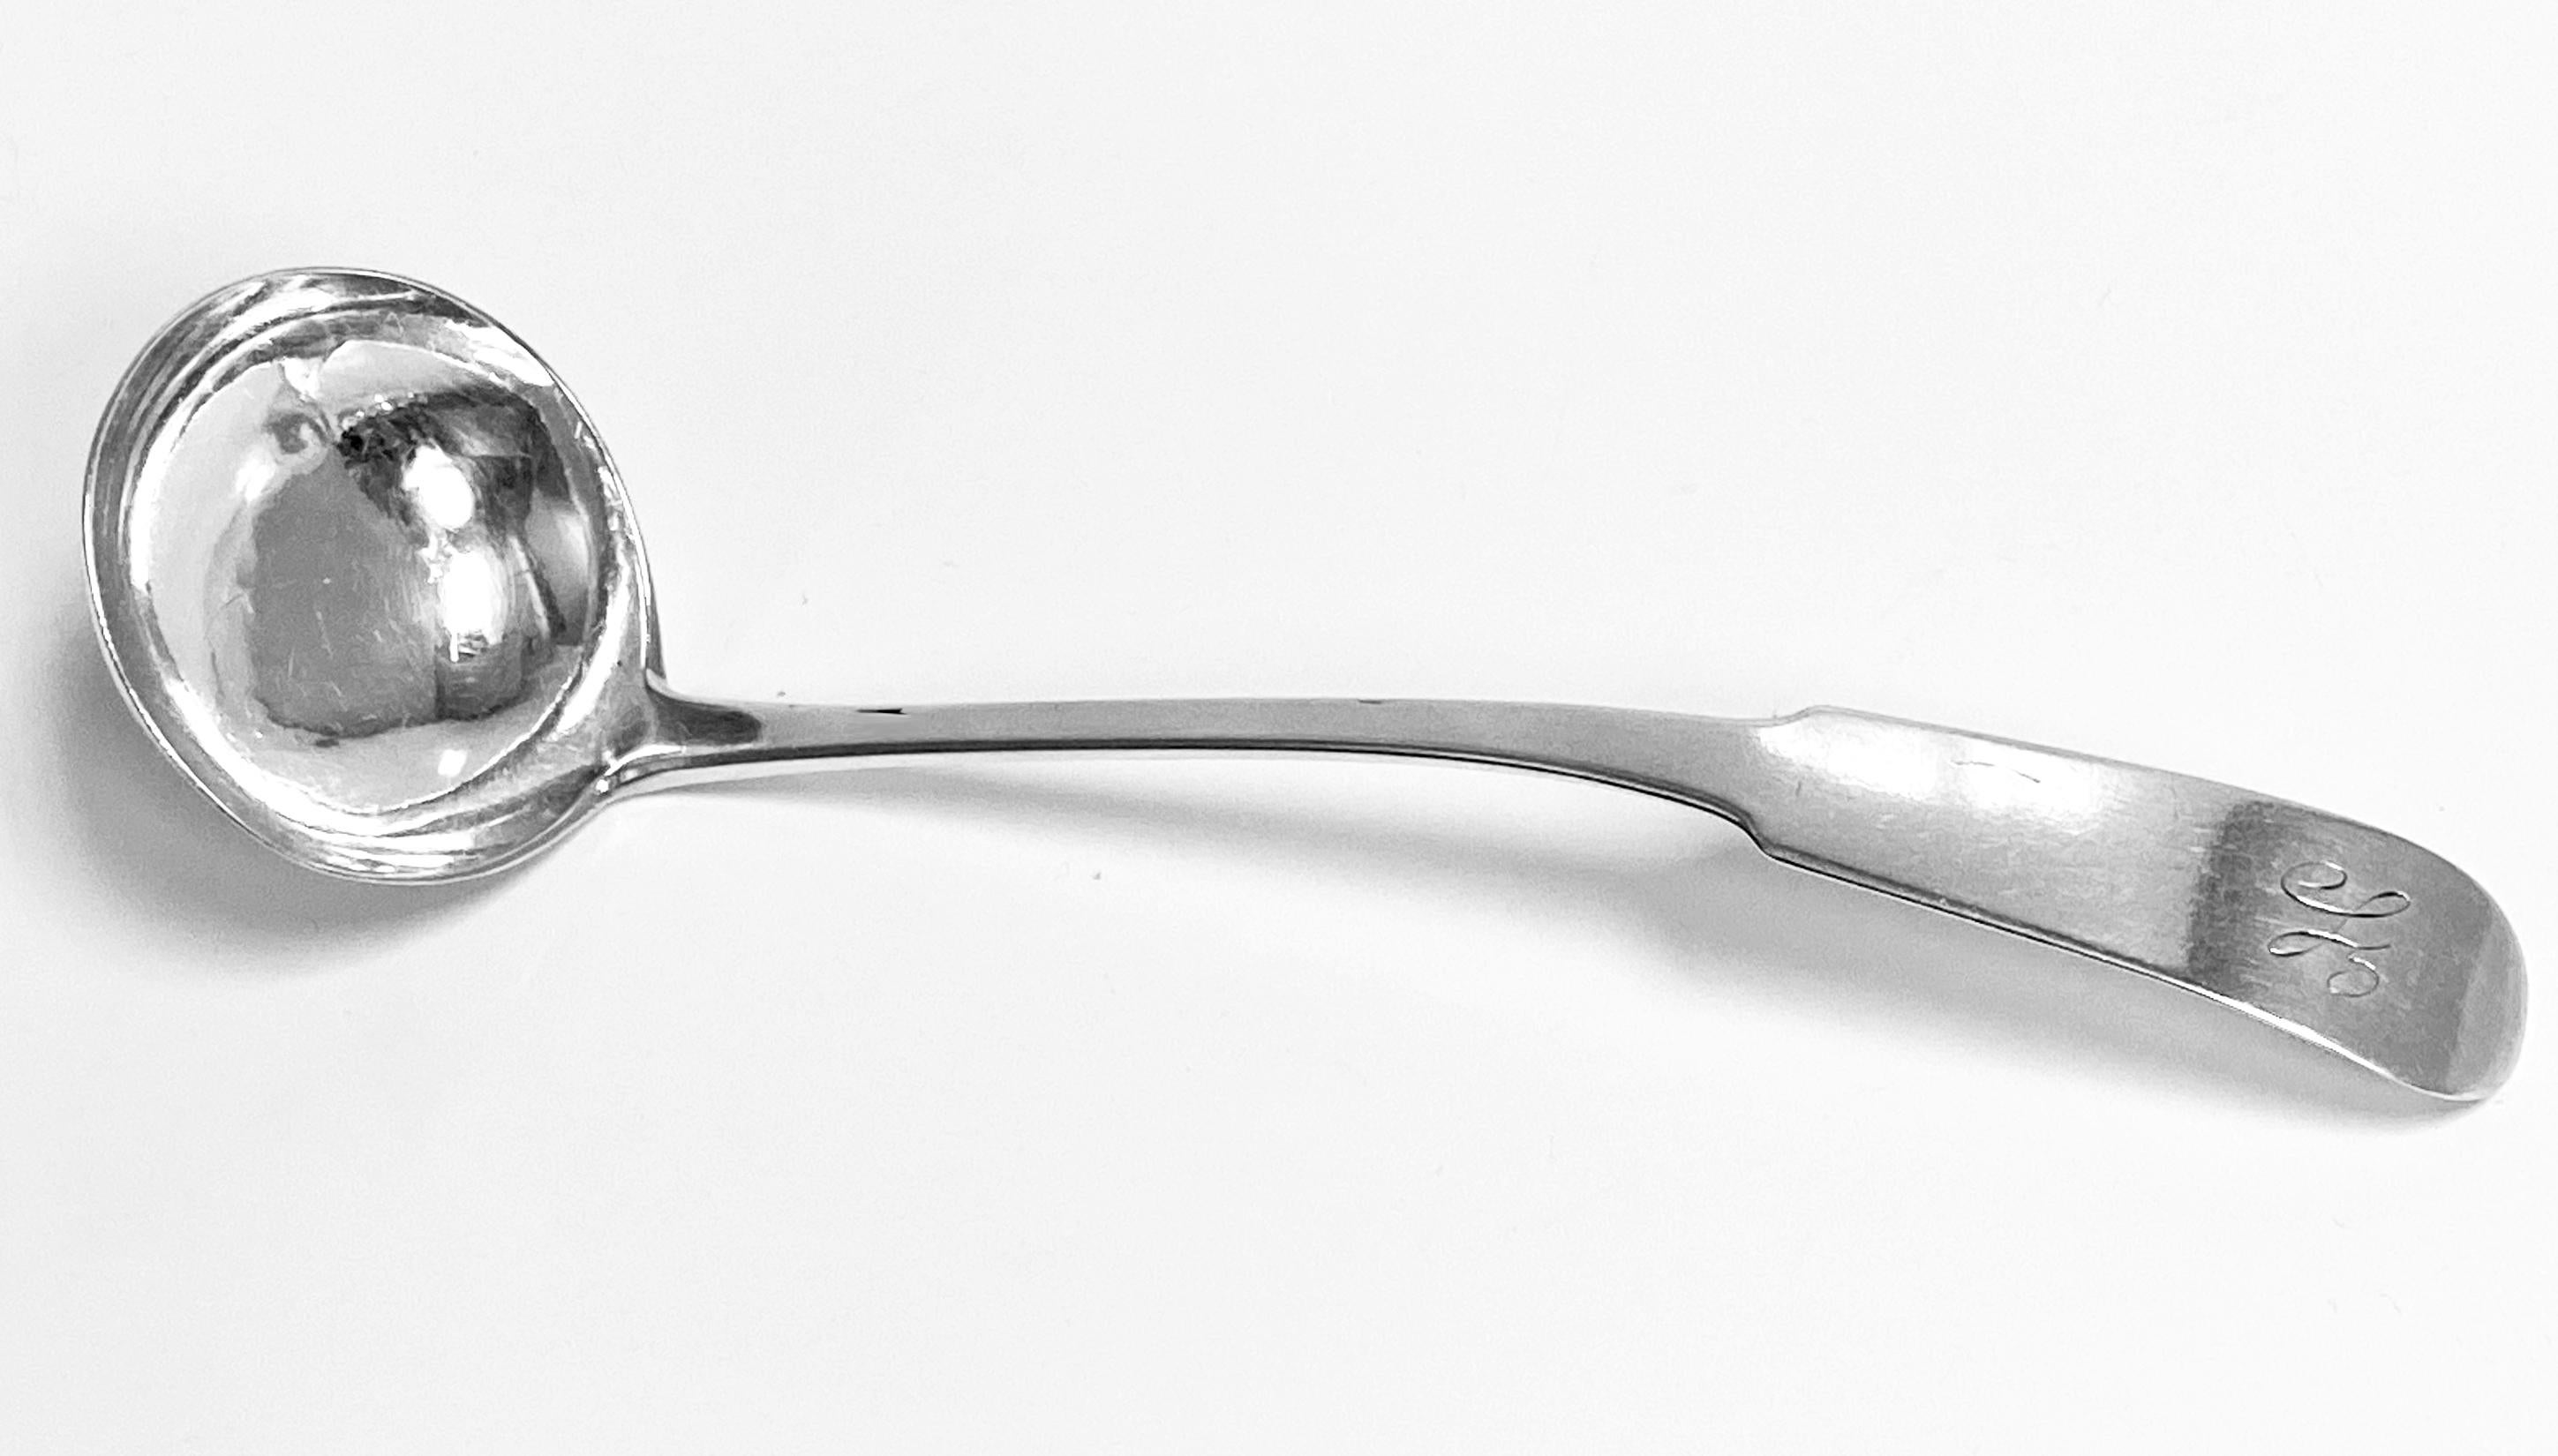 Scottish Georgian Silver Toddy Sauce ladle Edinburgh 1824 Alex Henderson. Plain elongated Fiddle pattern, light H monogram. Good condition, clear hallmarks. Reflections from photography only. Length: 6 inches. Weight: 22.21 grams 